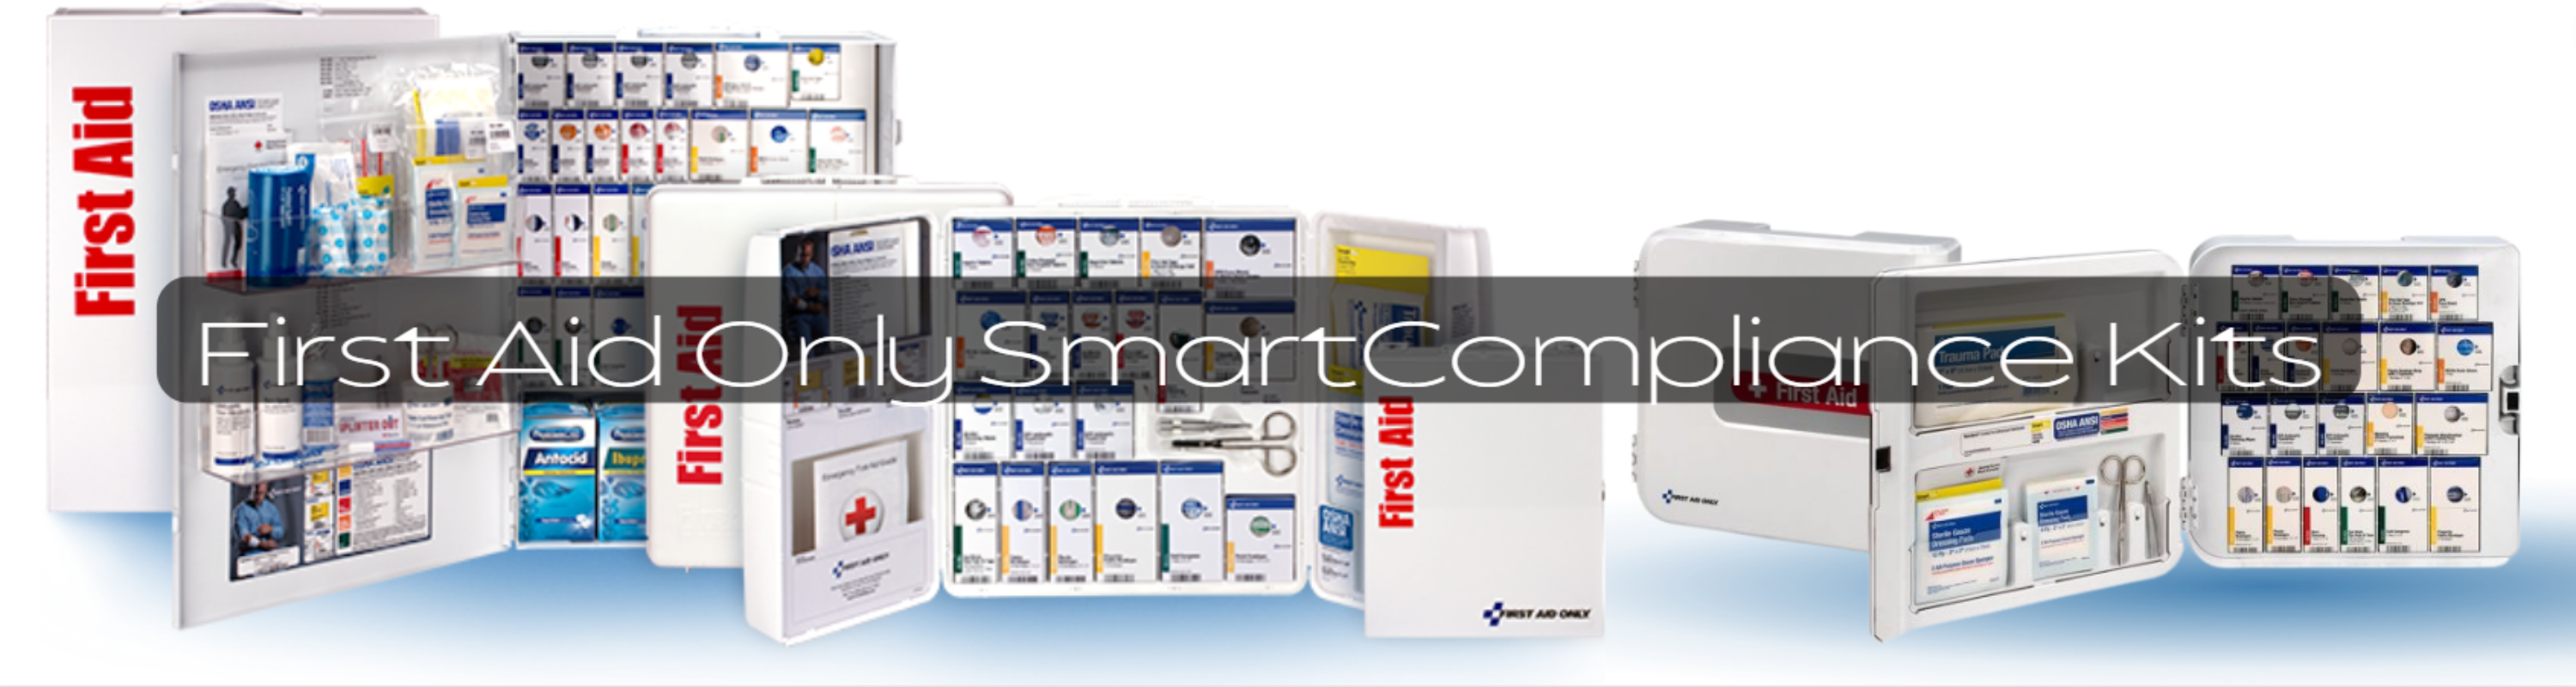 First aid Only SmartCompliance Banner